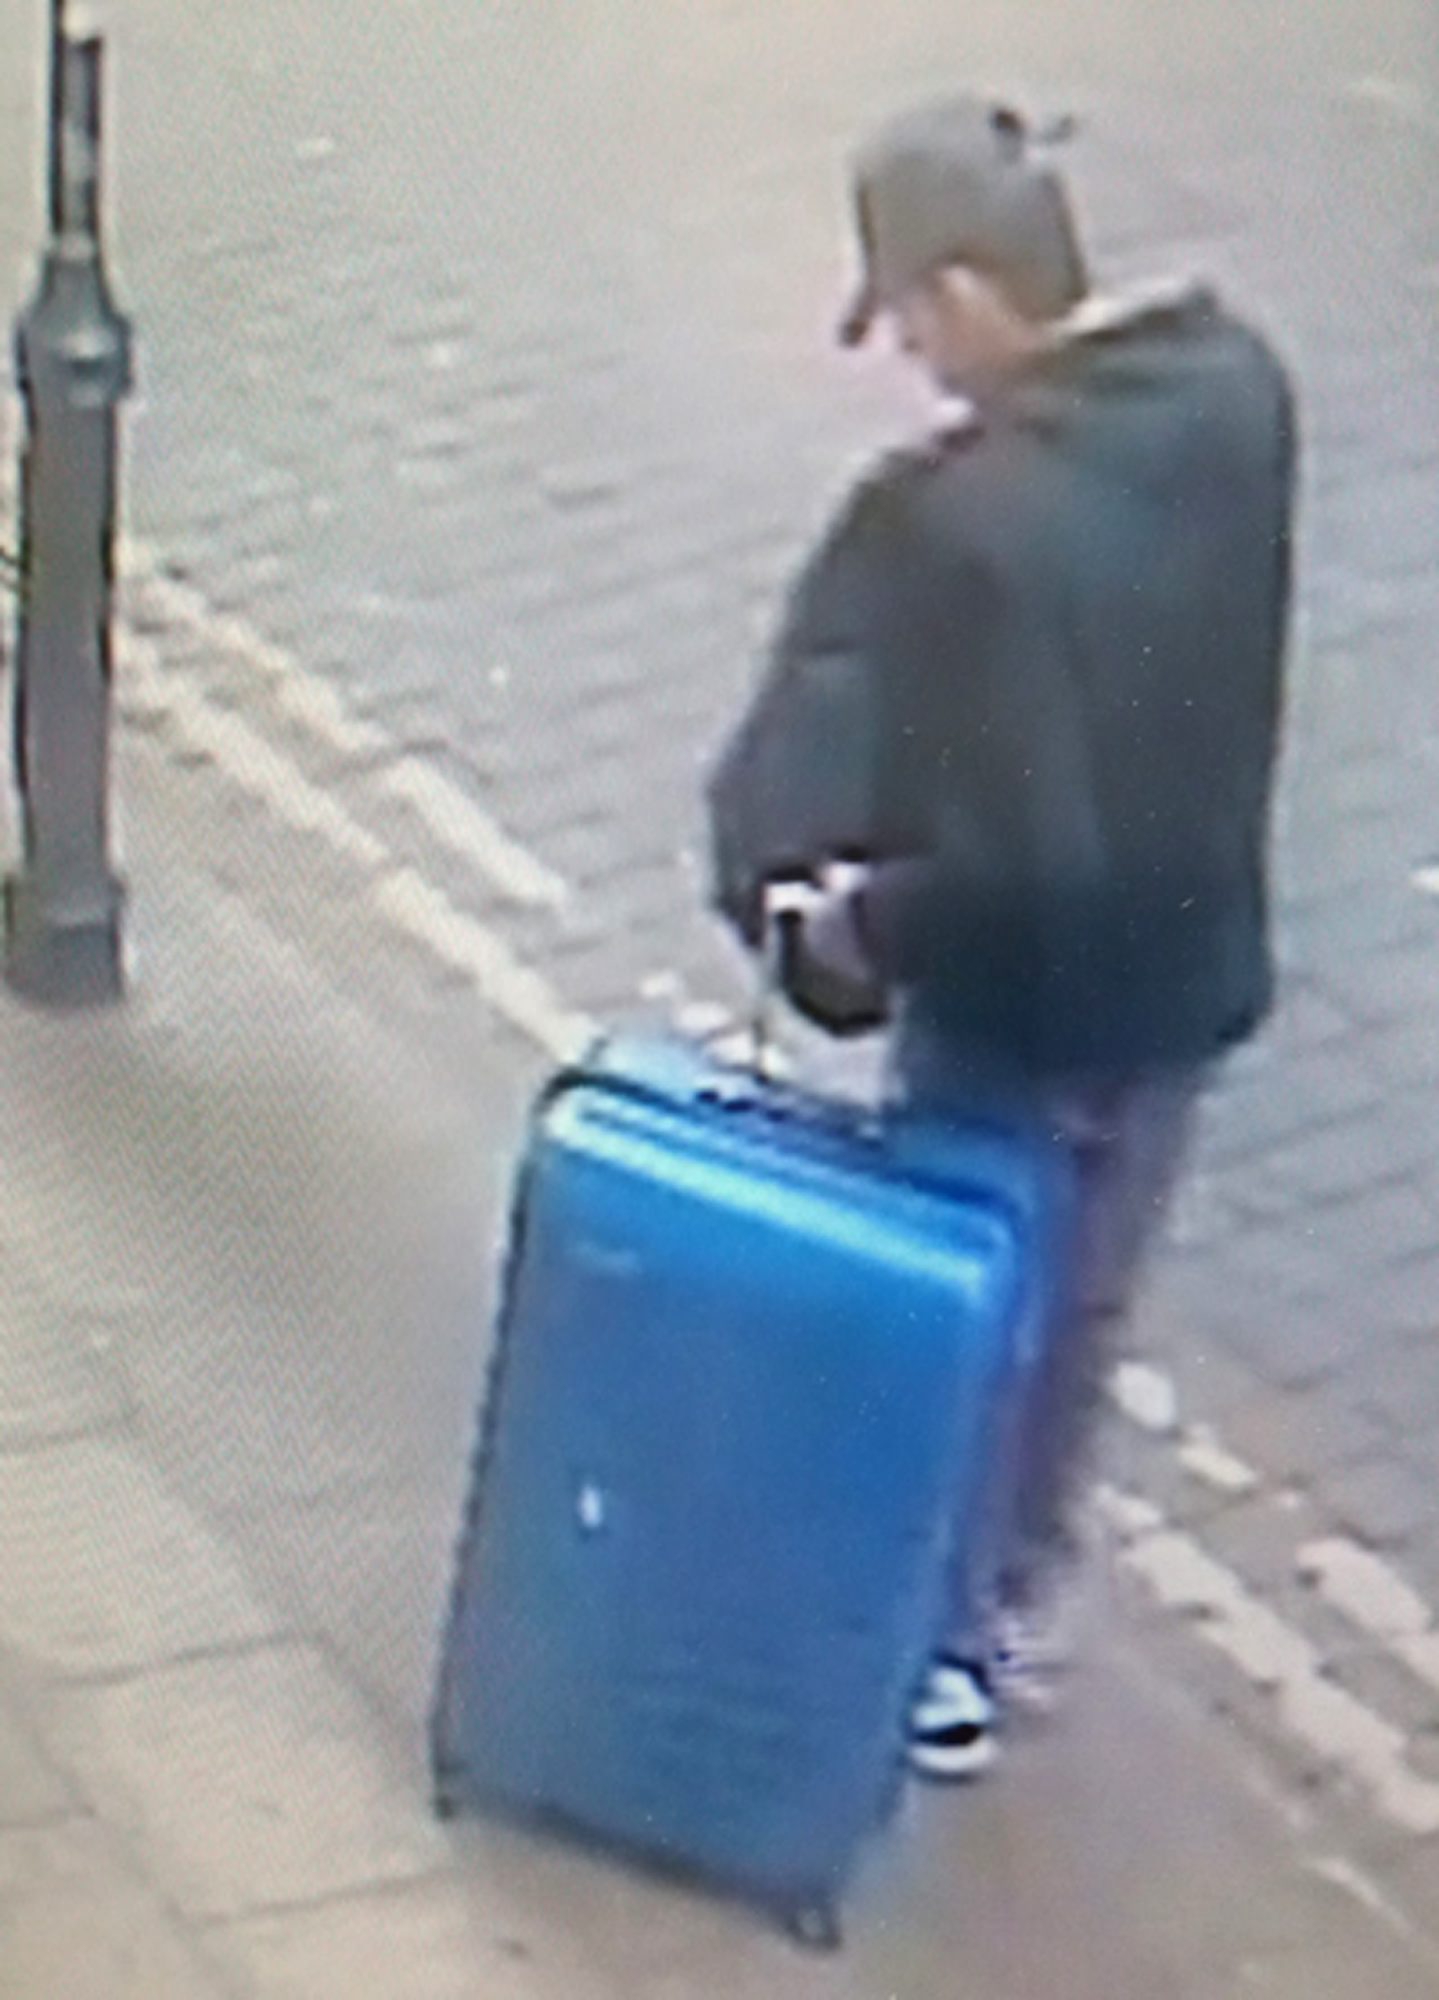 This is a handout photo taken on Monday, May 22, 2017 from CCTV and issued on Monday, May 29, 2017 by Greater Manchester Police of Salman Abedi in an unknown location of the city centre in Manchester, England. The police released an image of the bomber carrying a distinctive blue suitcase and an image of a replica of the case as they appealed for information about his final days. (Greater Manchester Police via AP) Britain Concert Blast